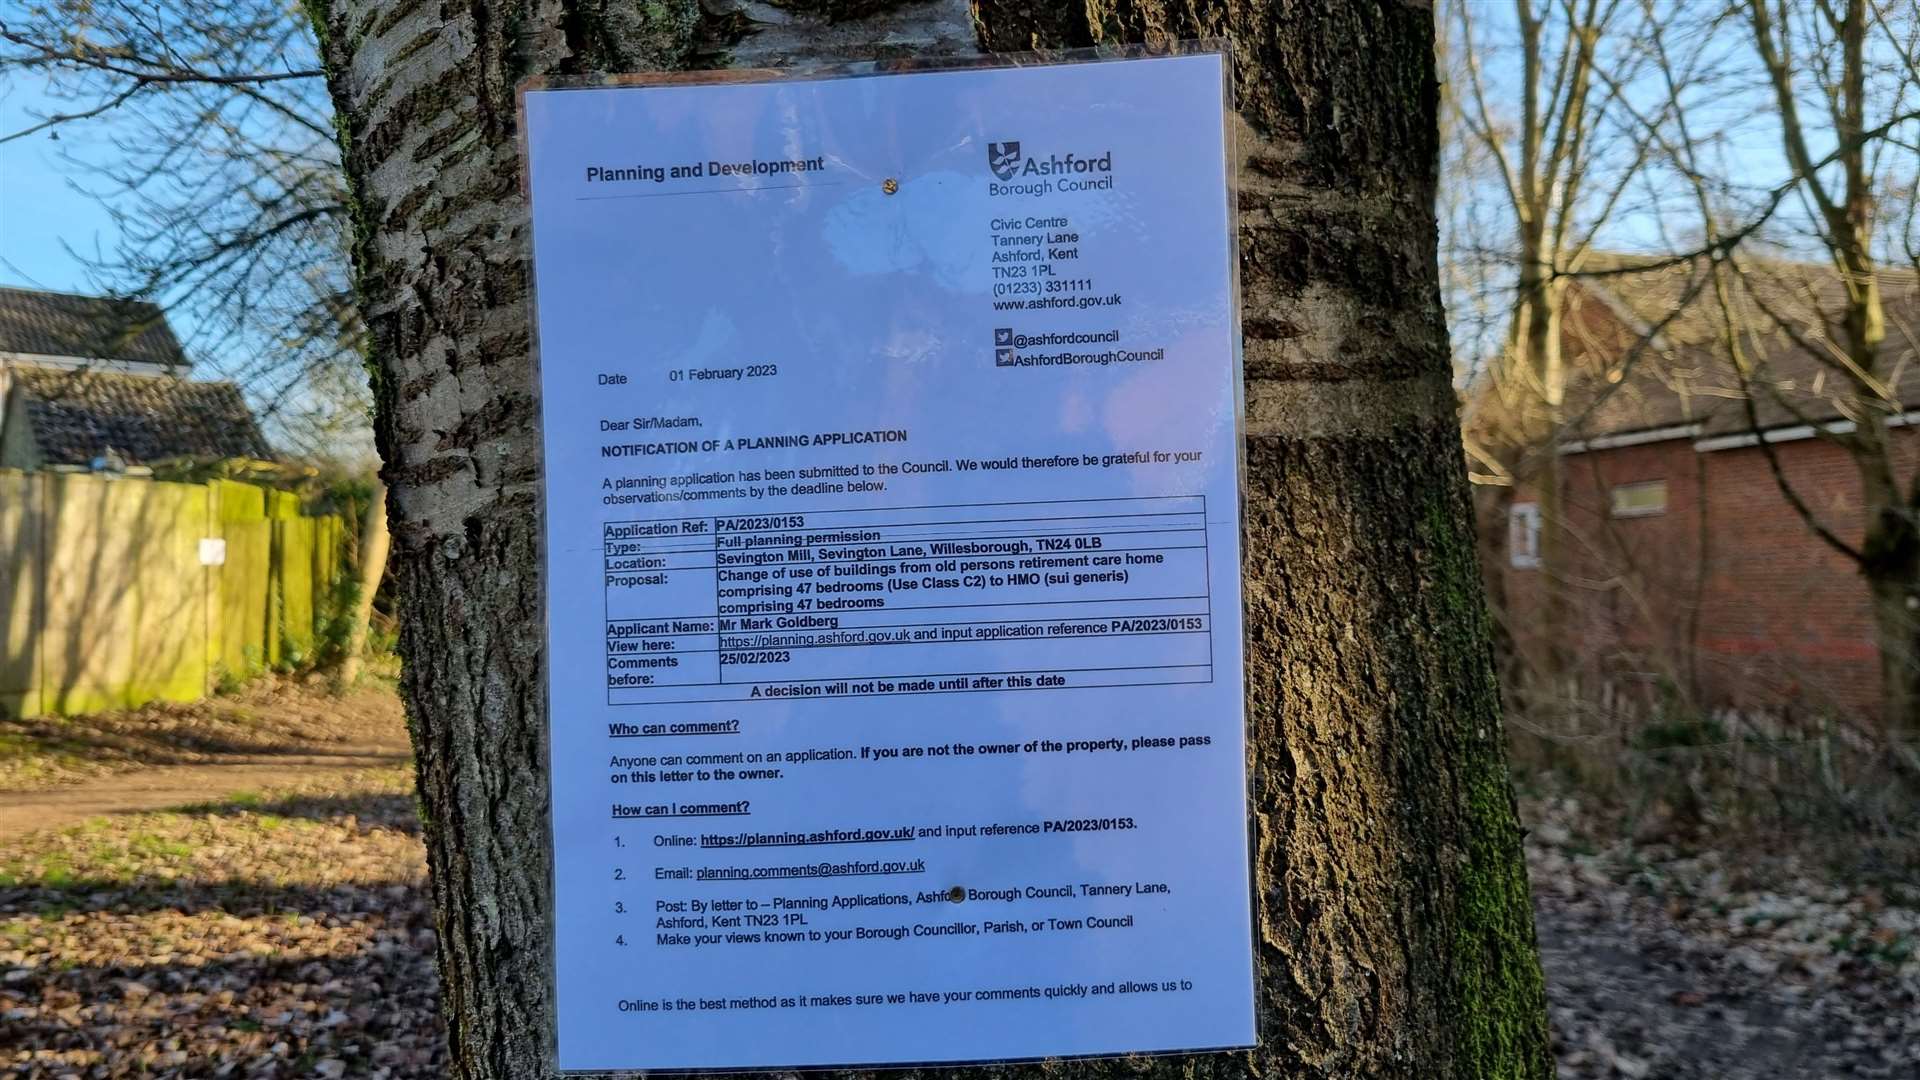 Residents found out about the plans when a notice was stapled to a tree